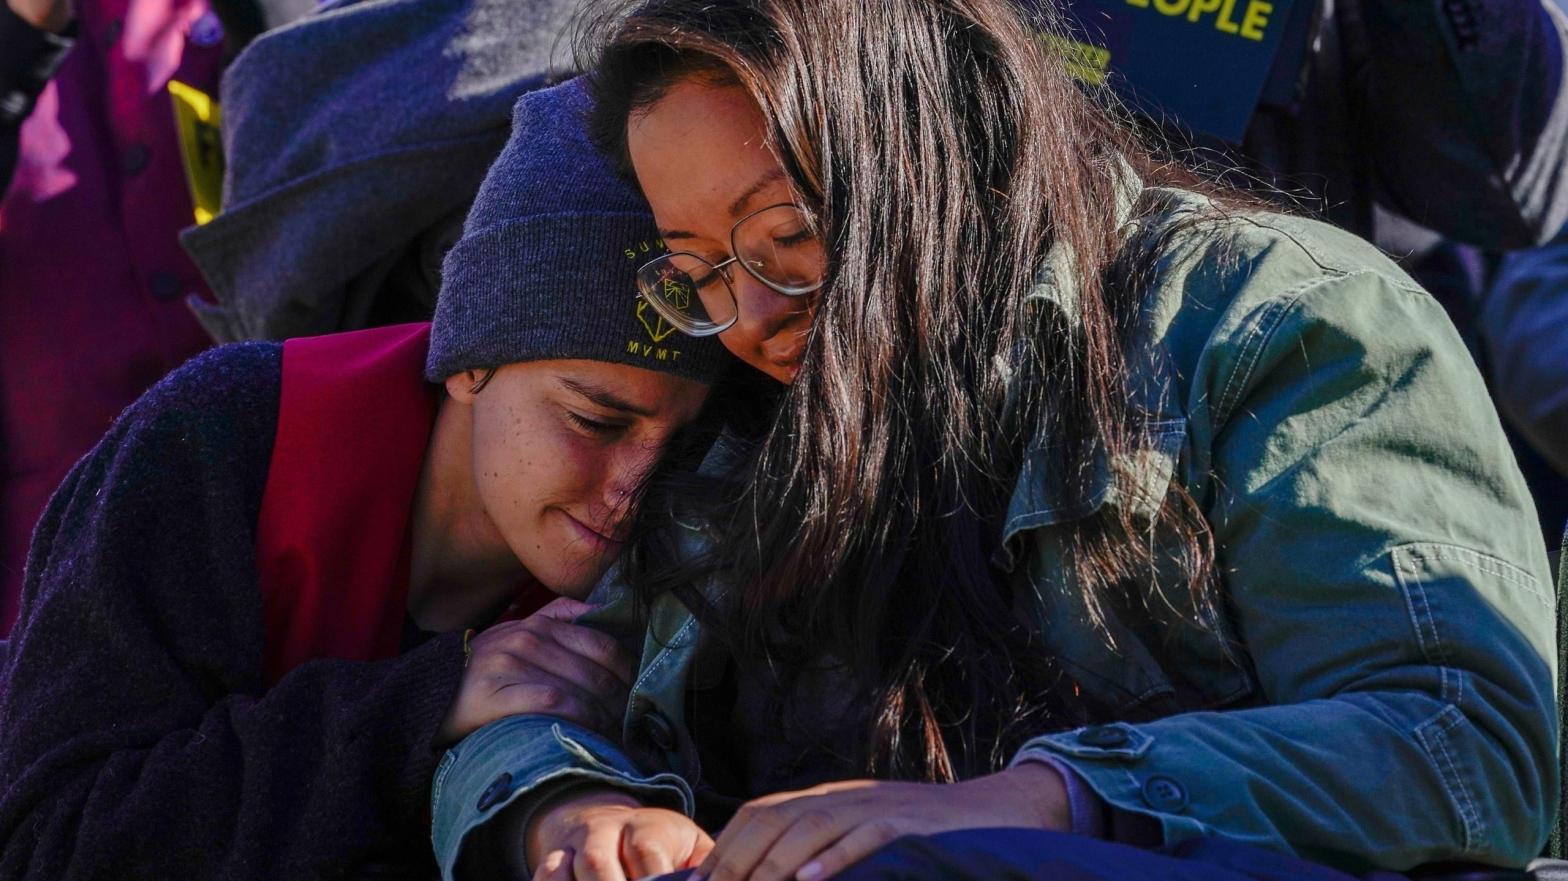 Youth Climate Activists Abby Leedy and Julie Paramo, who are both on a hunger strike, embrace at an action on October 27, 2021 in Washington, DC. (Photo: Jemal Countess/Repairers Of The Breach, Getty Images)